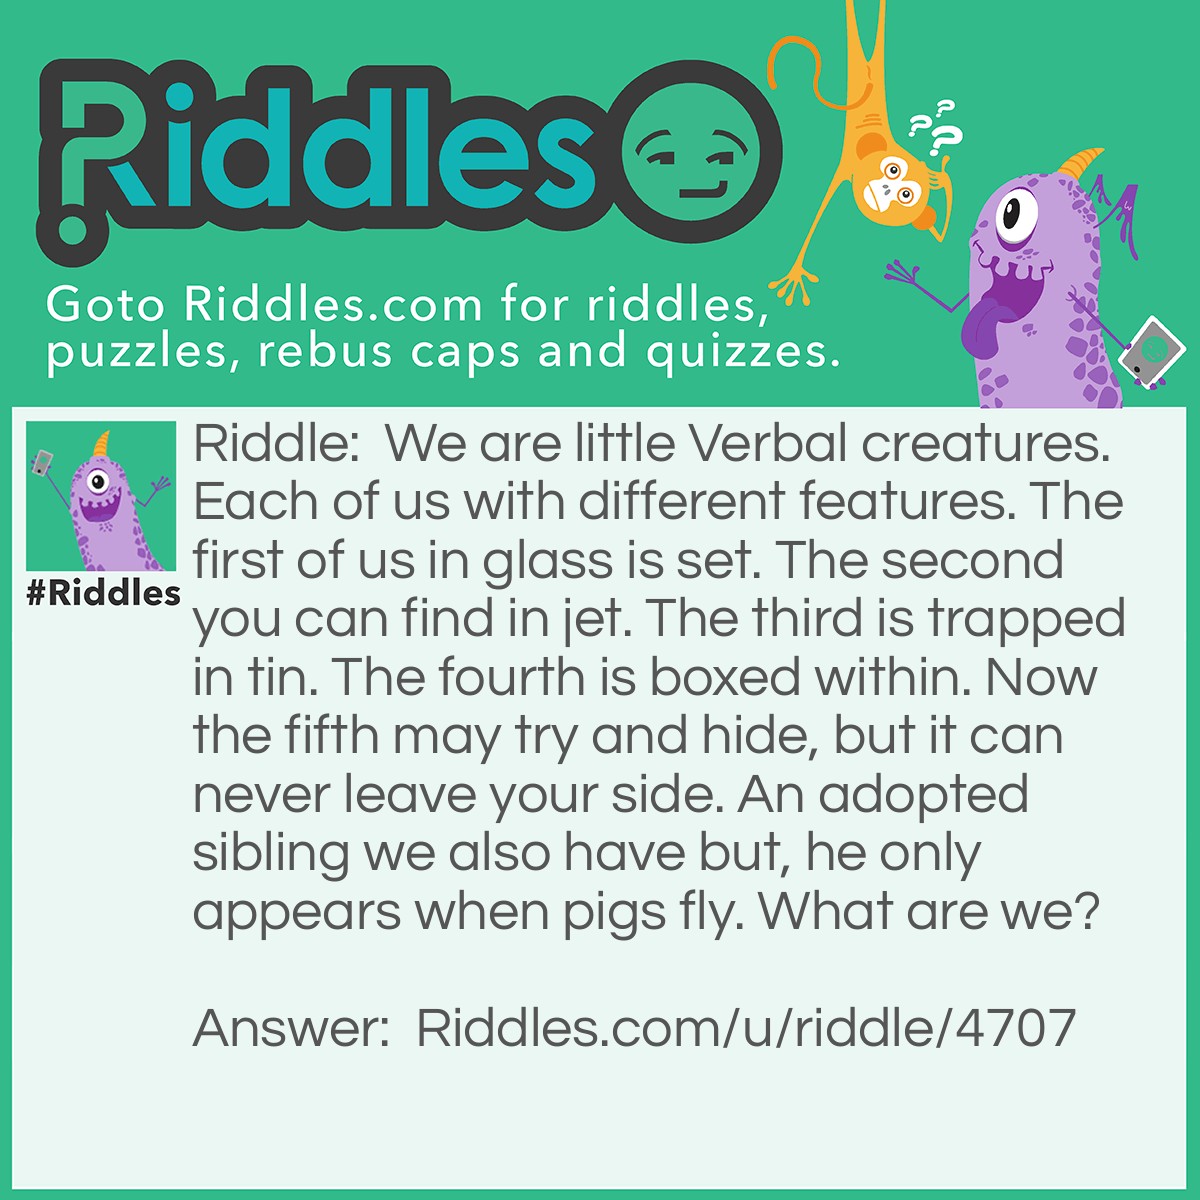 Riddle: We are little Verbal creatures. Each of us with different features. The first of us in glass is set. The second you can find in jet. The third is trapped in tin. The fourth is boxed within. Now the fifth may try and hide, but it can never leave your side. An adopted sibling we also have but, he only appears when pigs fly. What are we? Answer: The vowels A, E, I, O, U and sometimes Y.